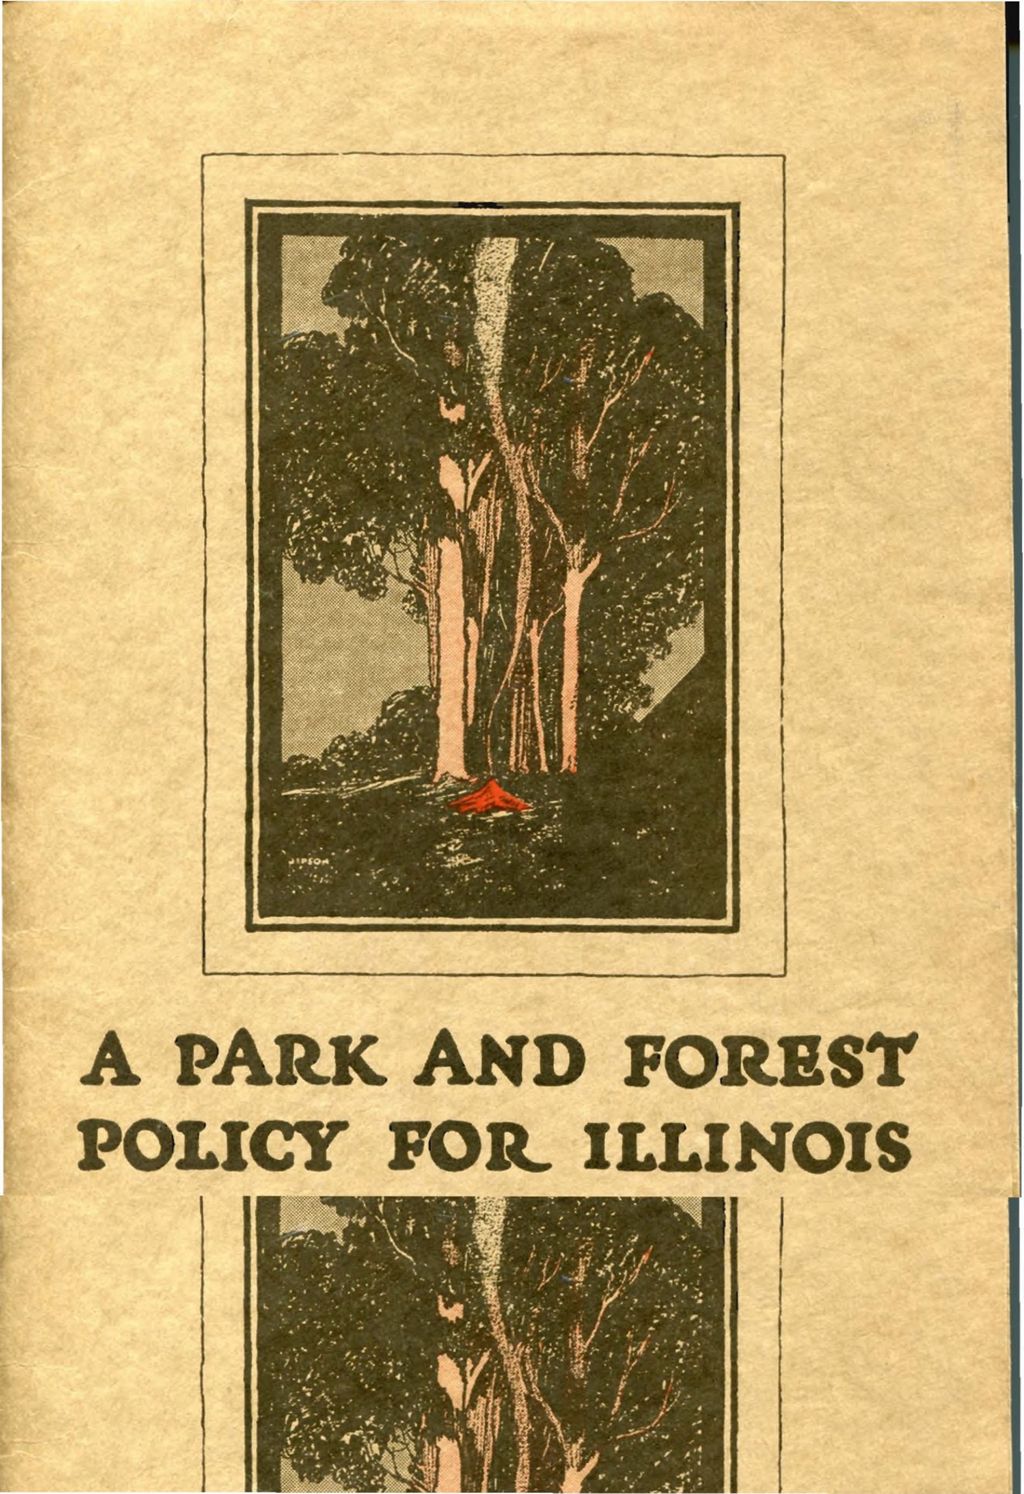 Friends of Our Native Landscape, A Park and Forest Policy for Illinois